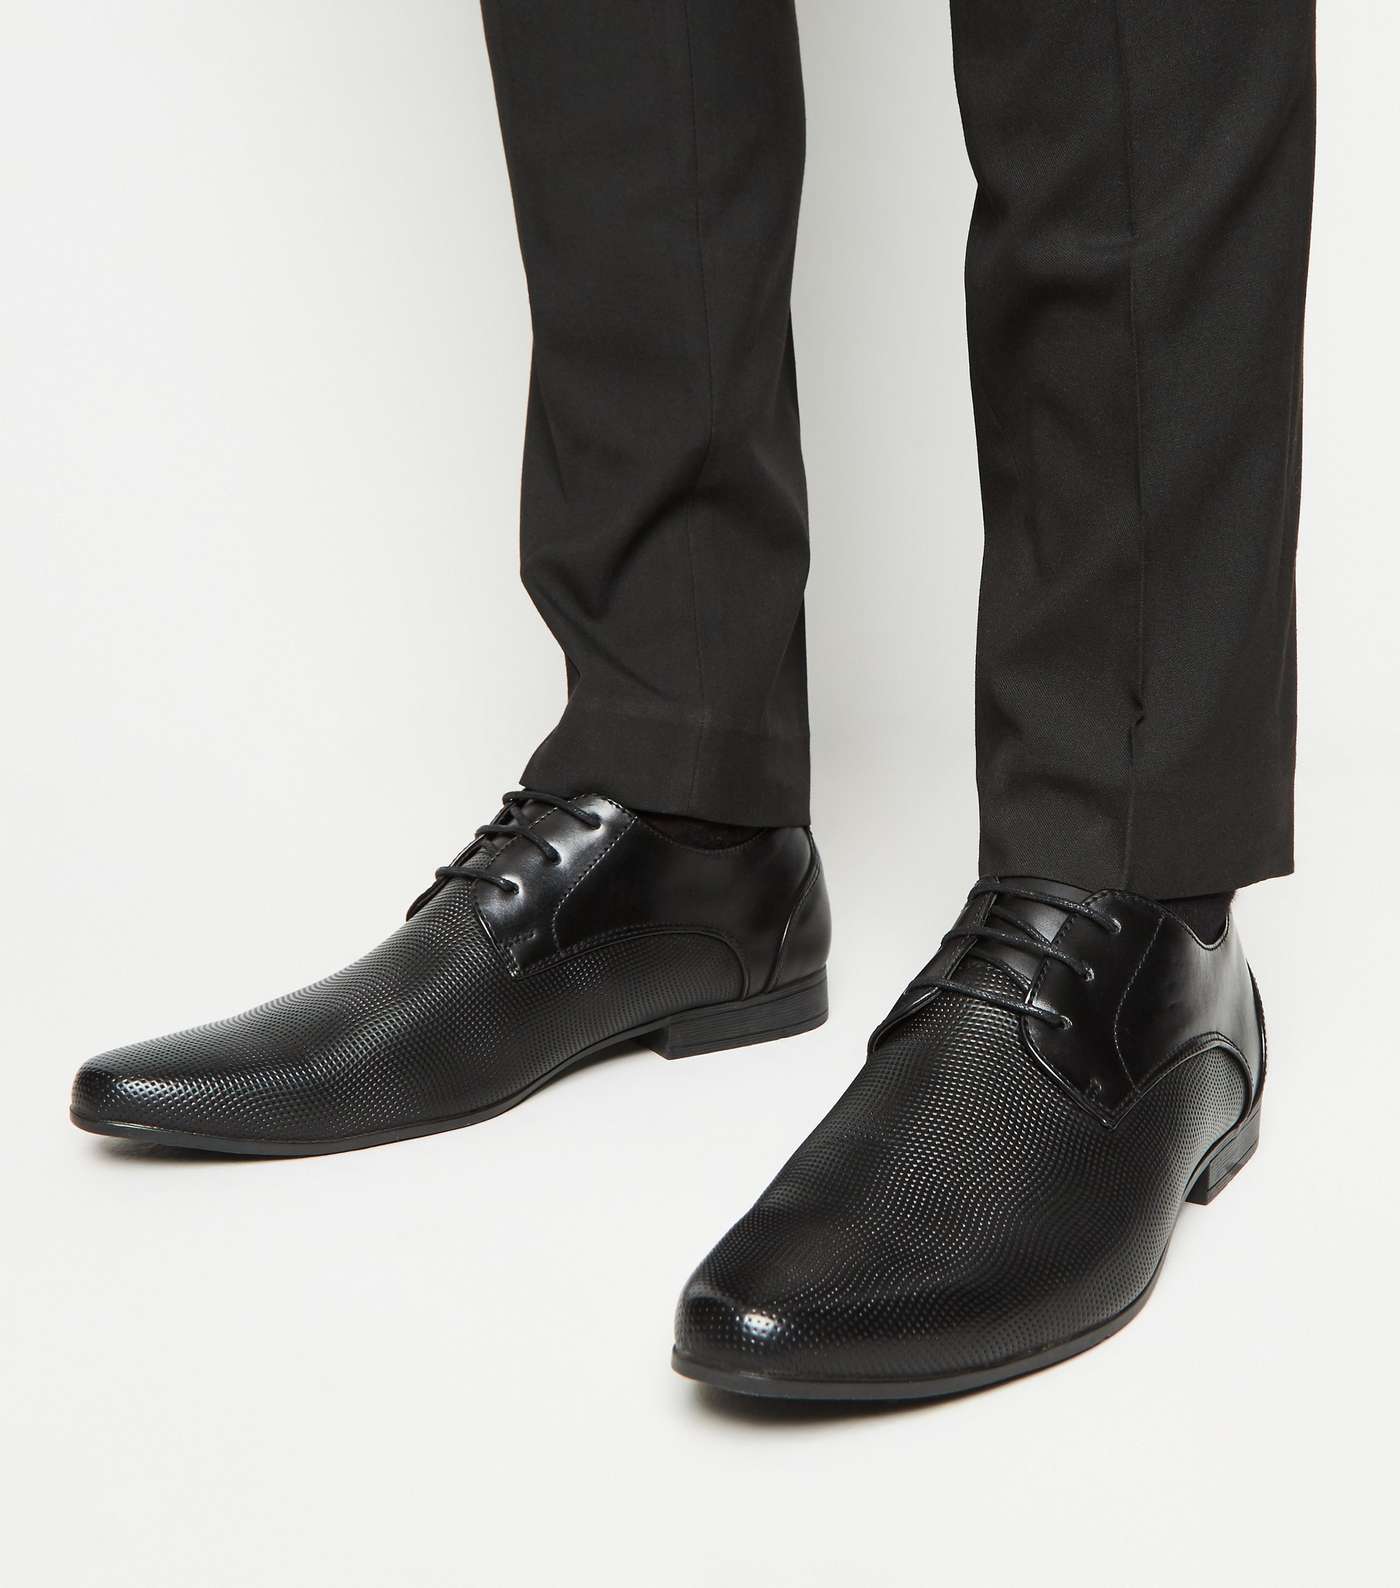 Black Perforated Formal Shoes